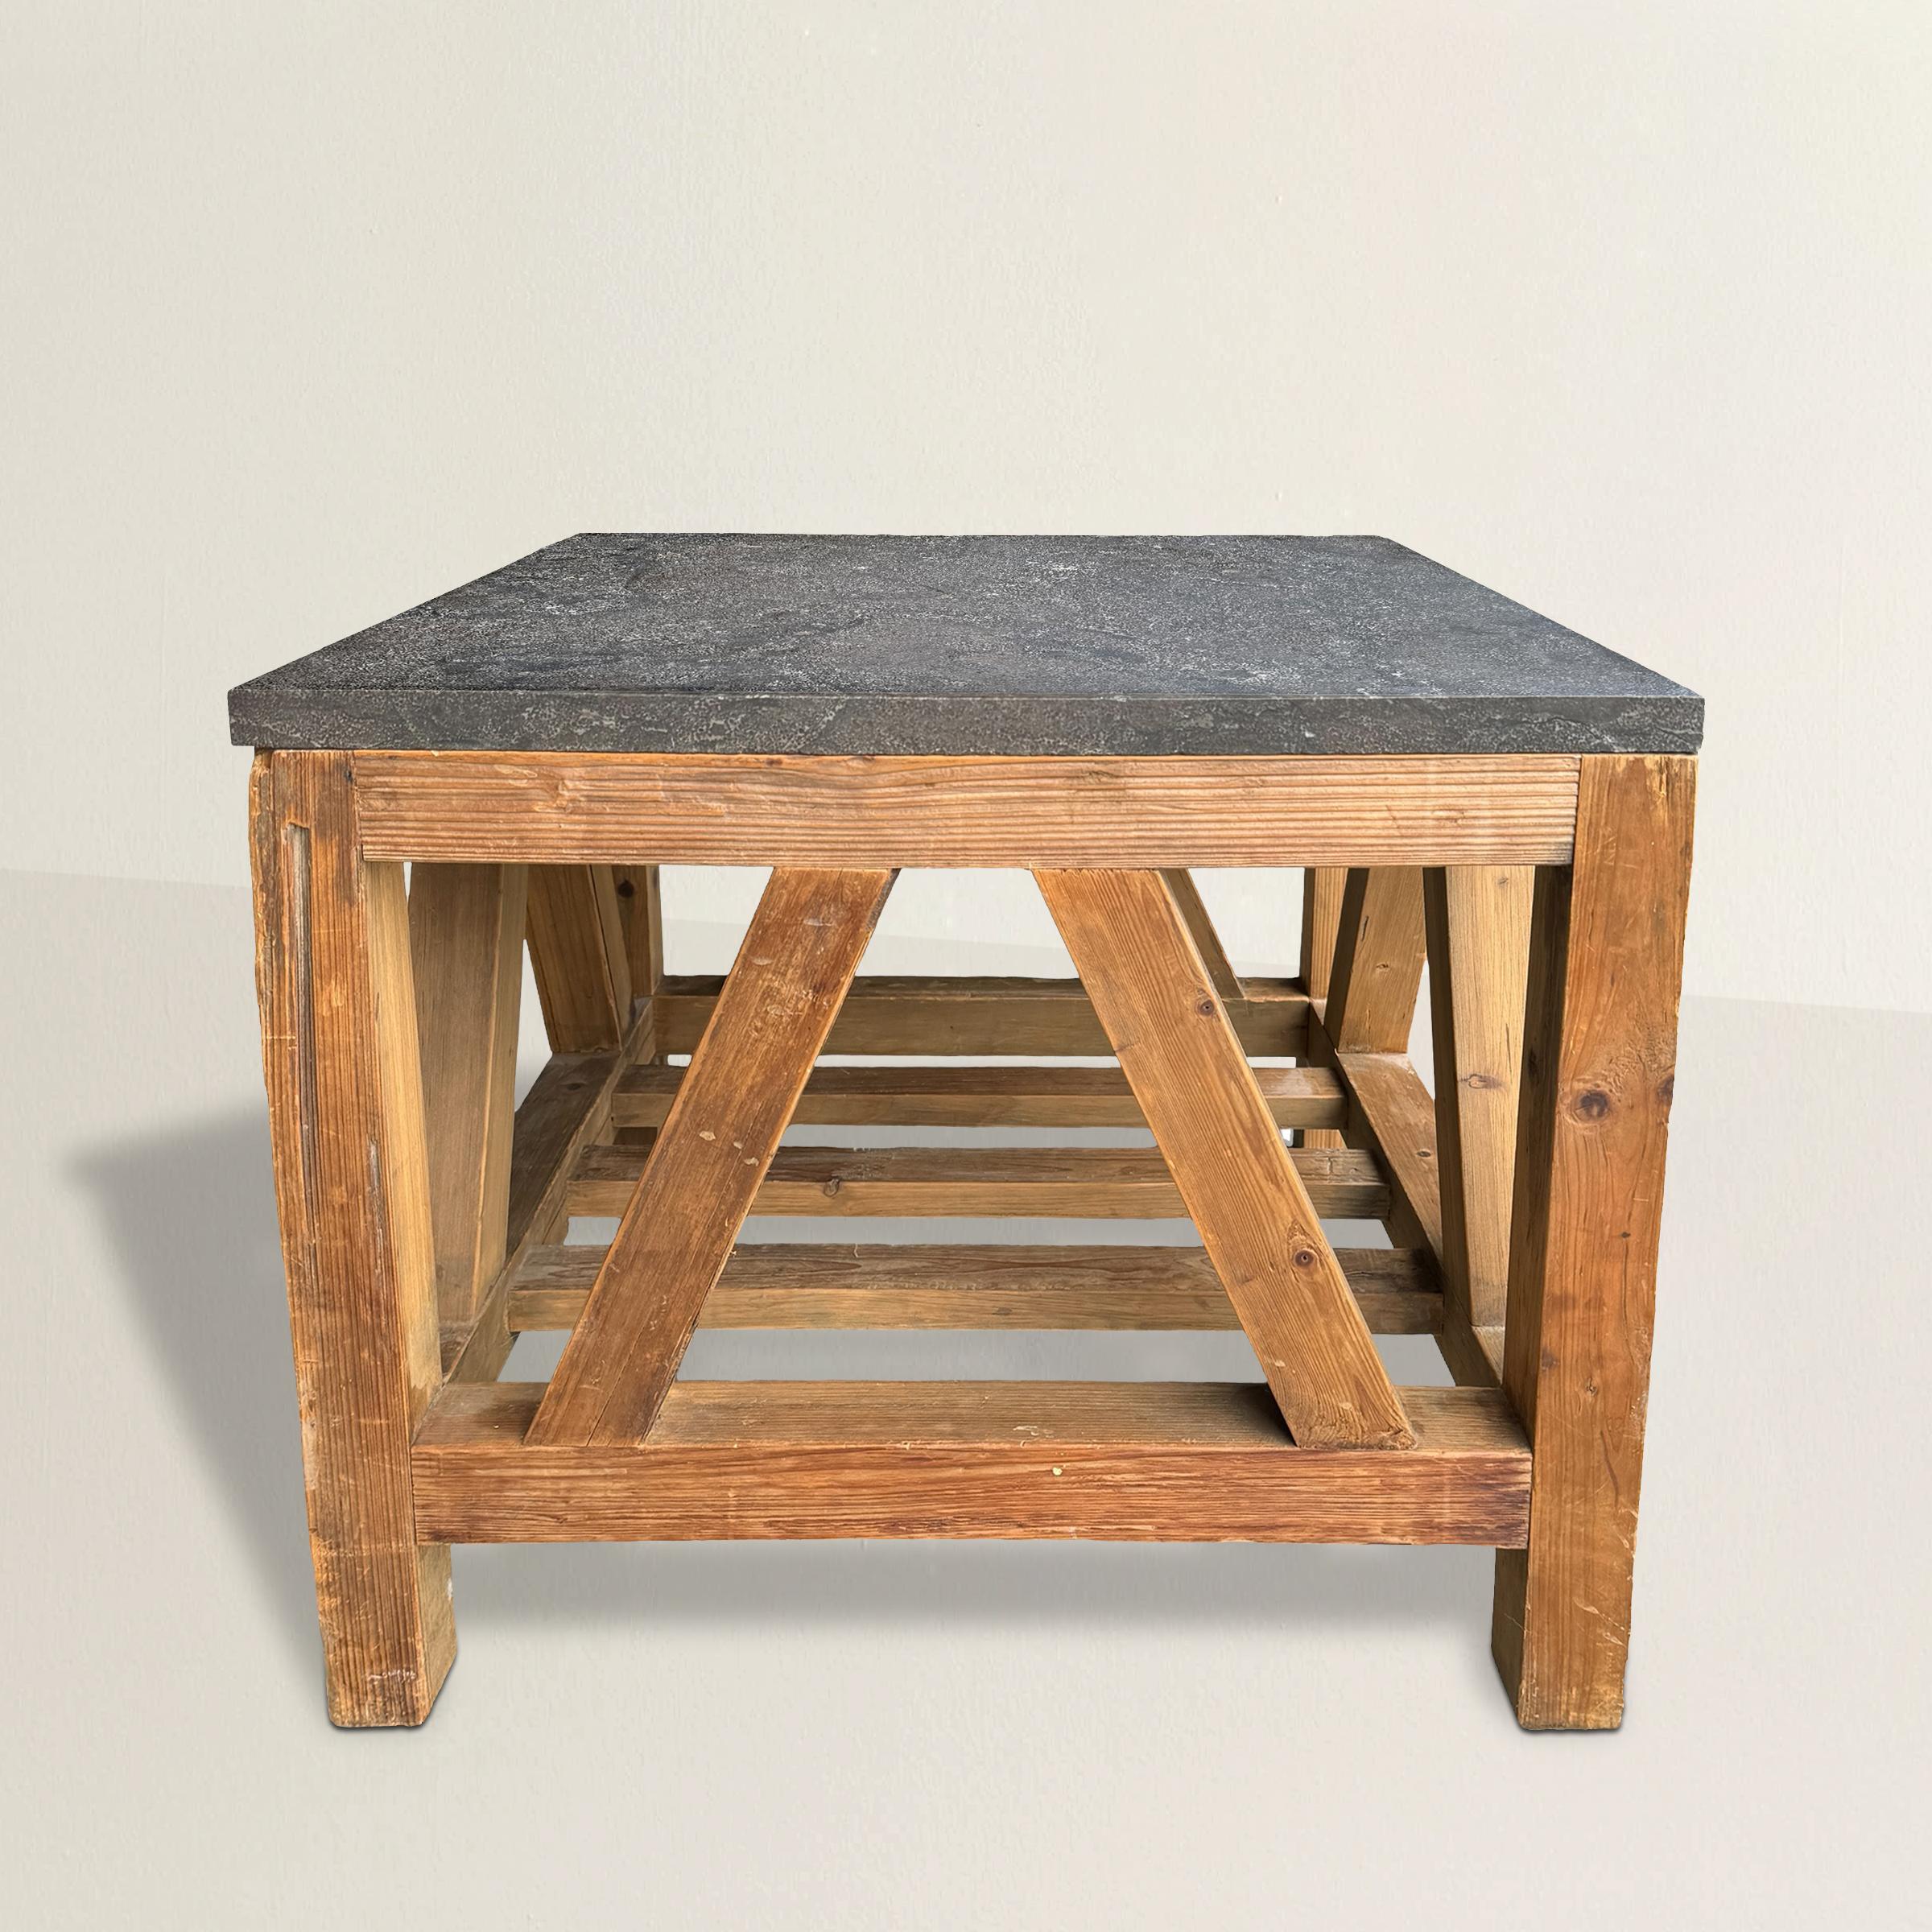 This 20th century American Modernist table, crafted from pine and crowned with a sleek gray marble top, is a captivating fusion of artistic inspiration and functional design. Drawing from the innovative spirit of French sculptor's stands, it pays